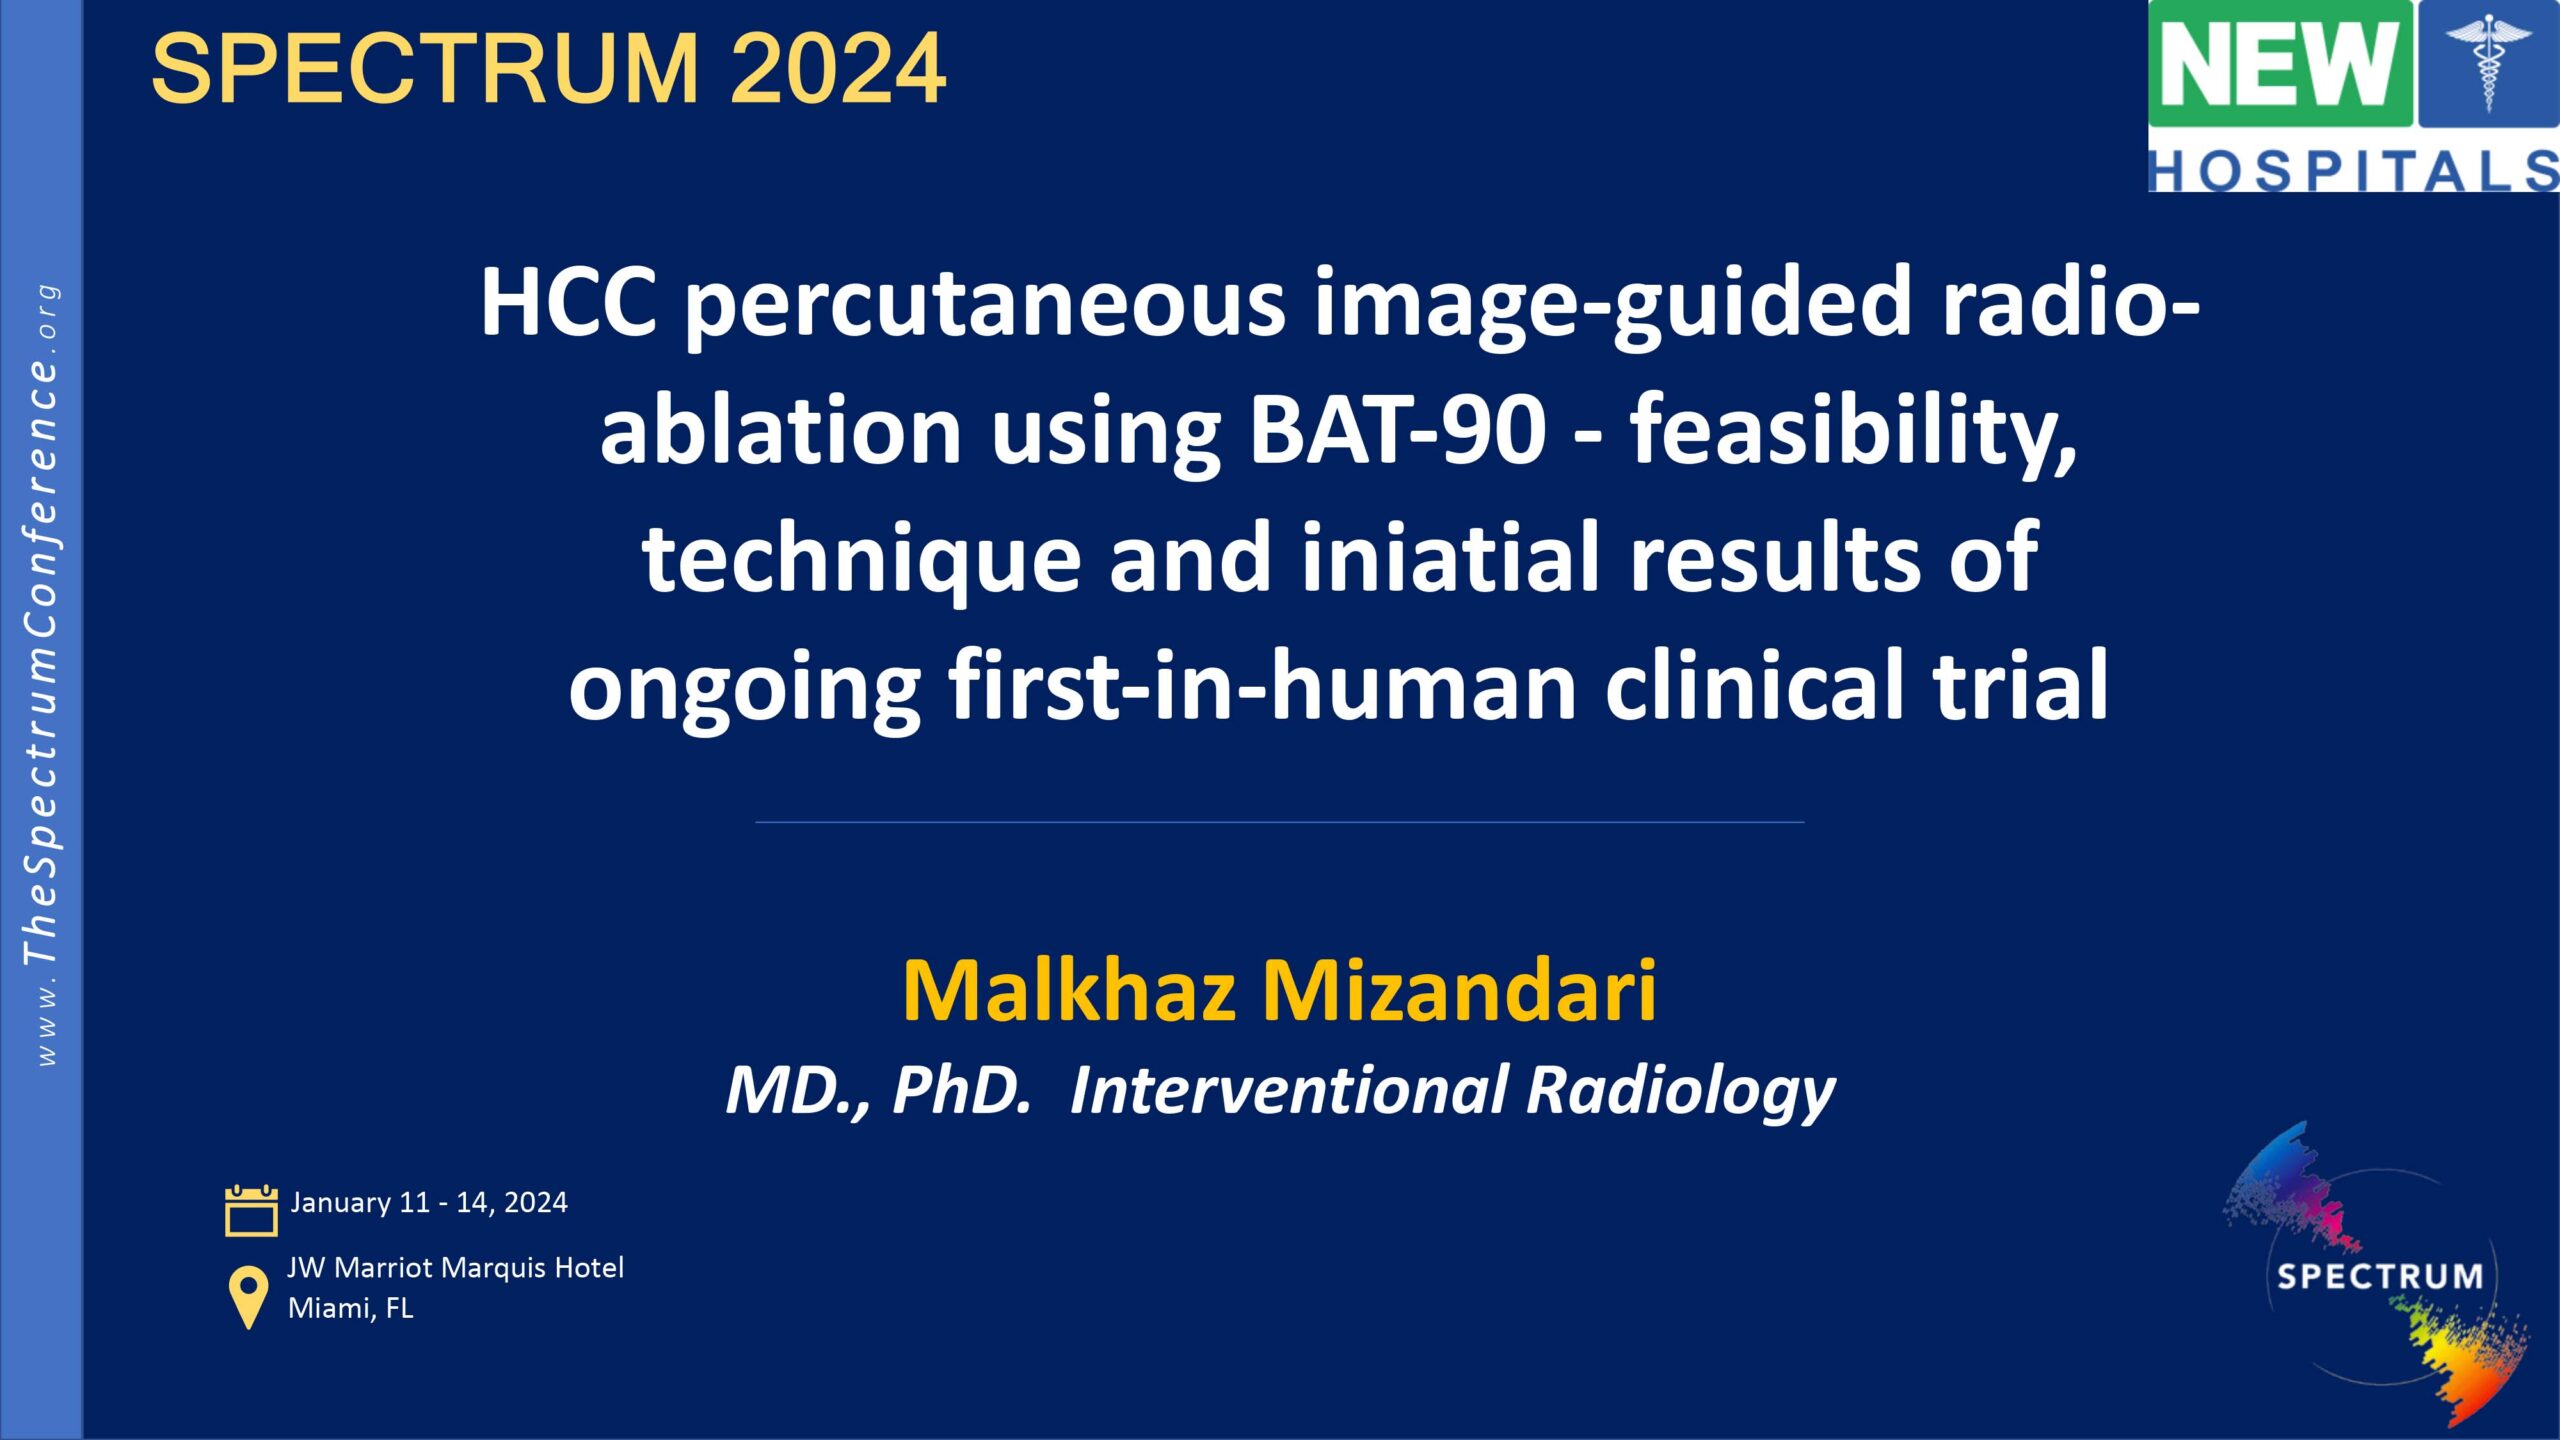 HCC Percutaneous Image-Guided Radio-Ablation Using BAT-90 – Feasibility, Technique and Initial Results of an Ongoing First-In-Human Clinical Trial